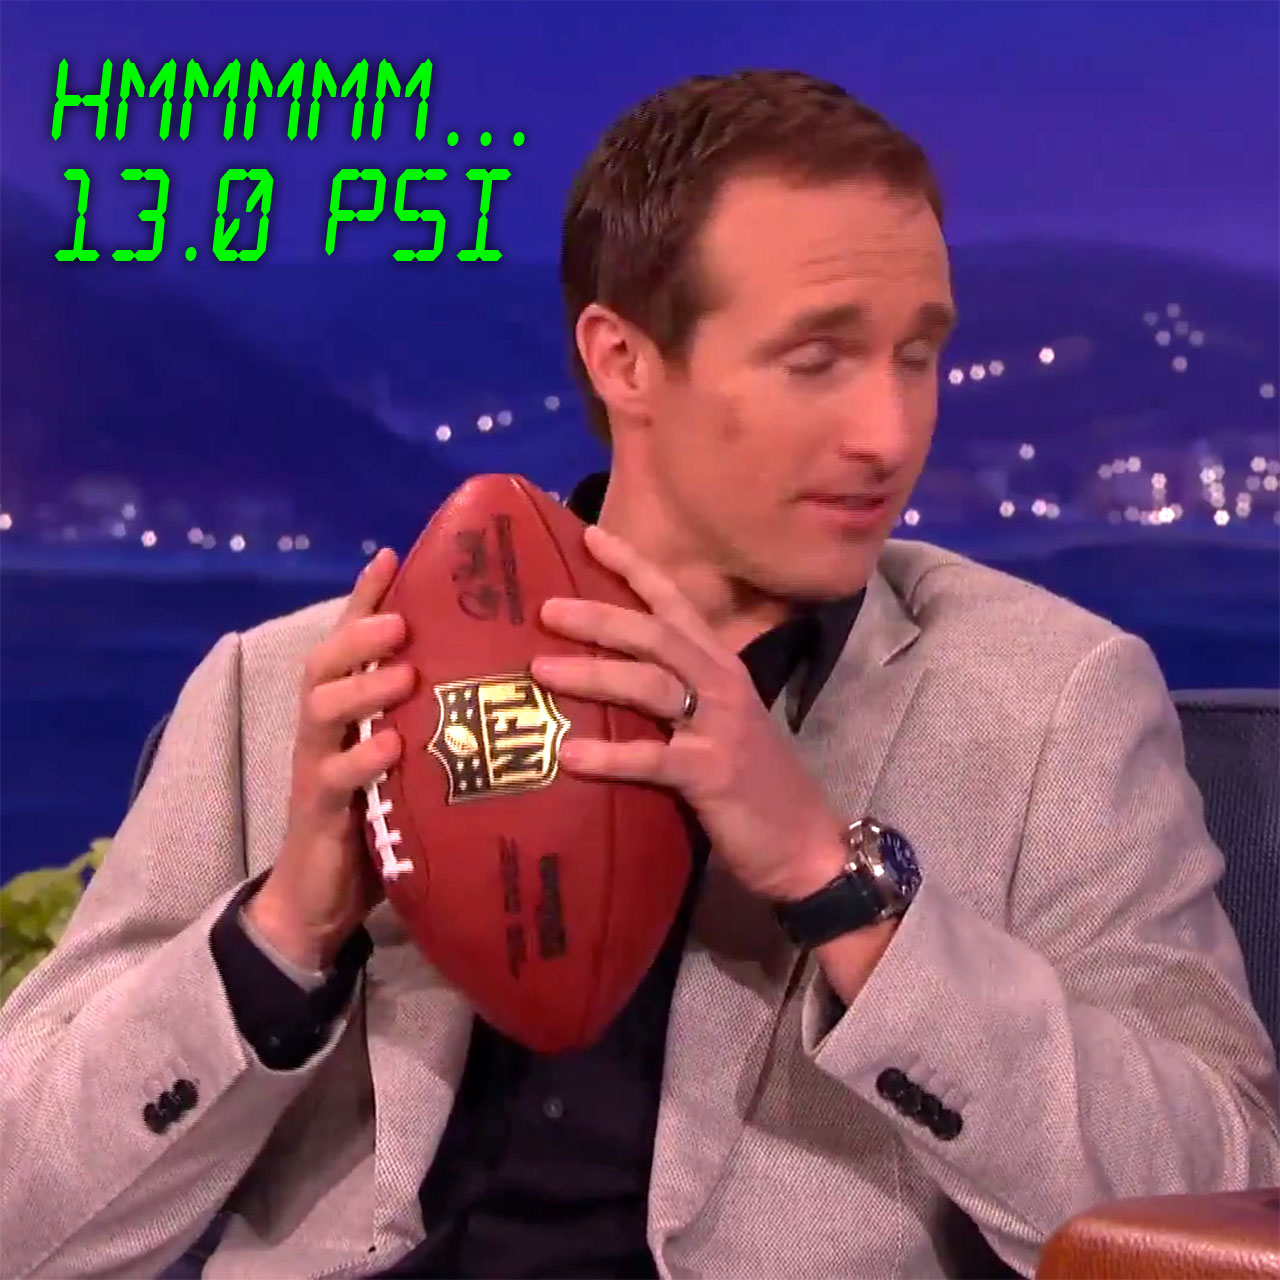 Drew Brees can read ball pressure with his hands